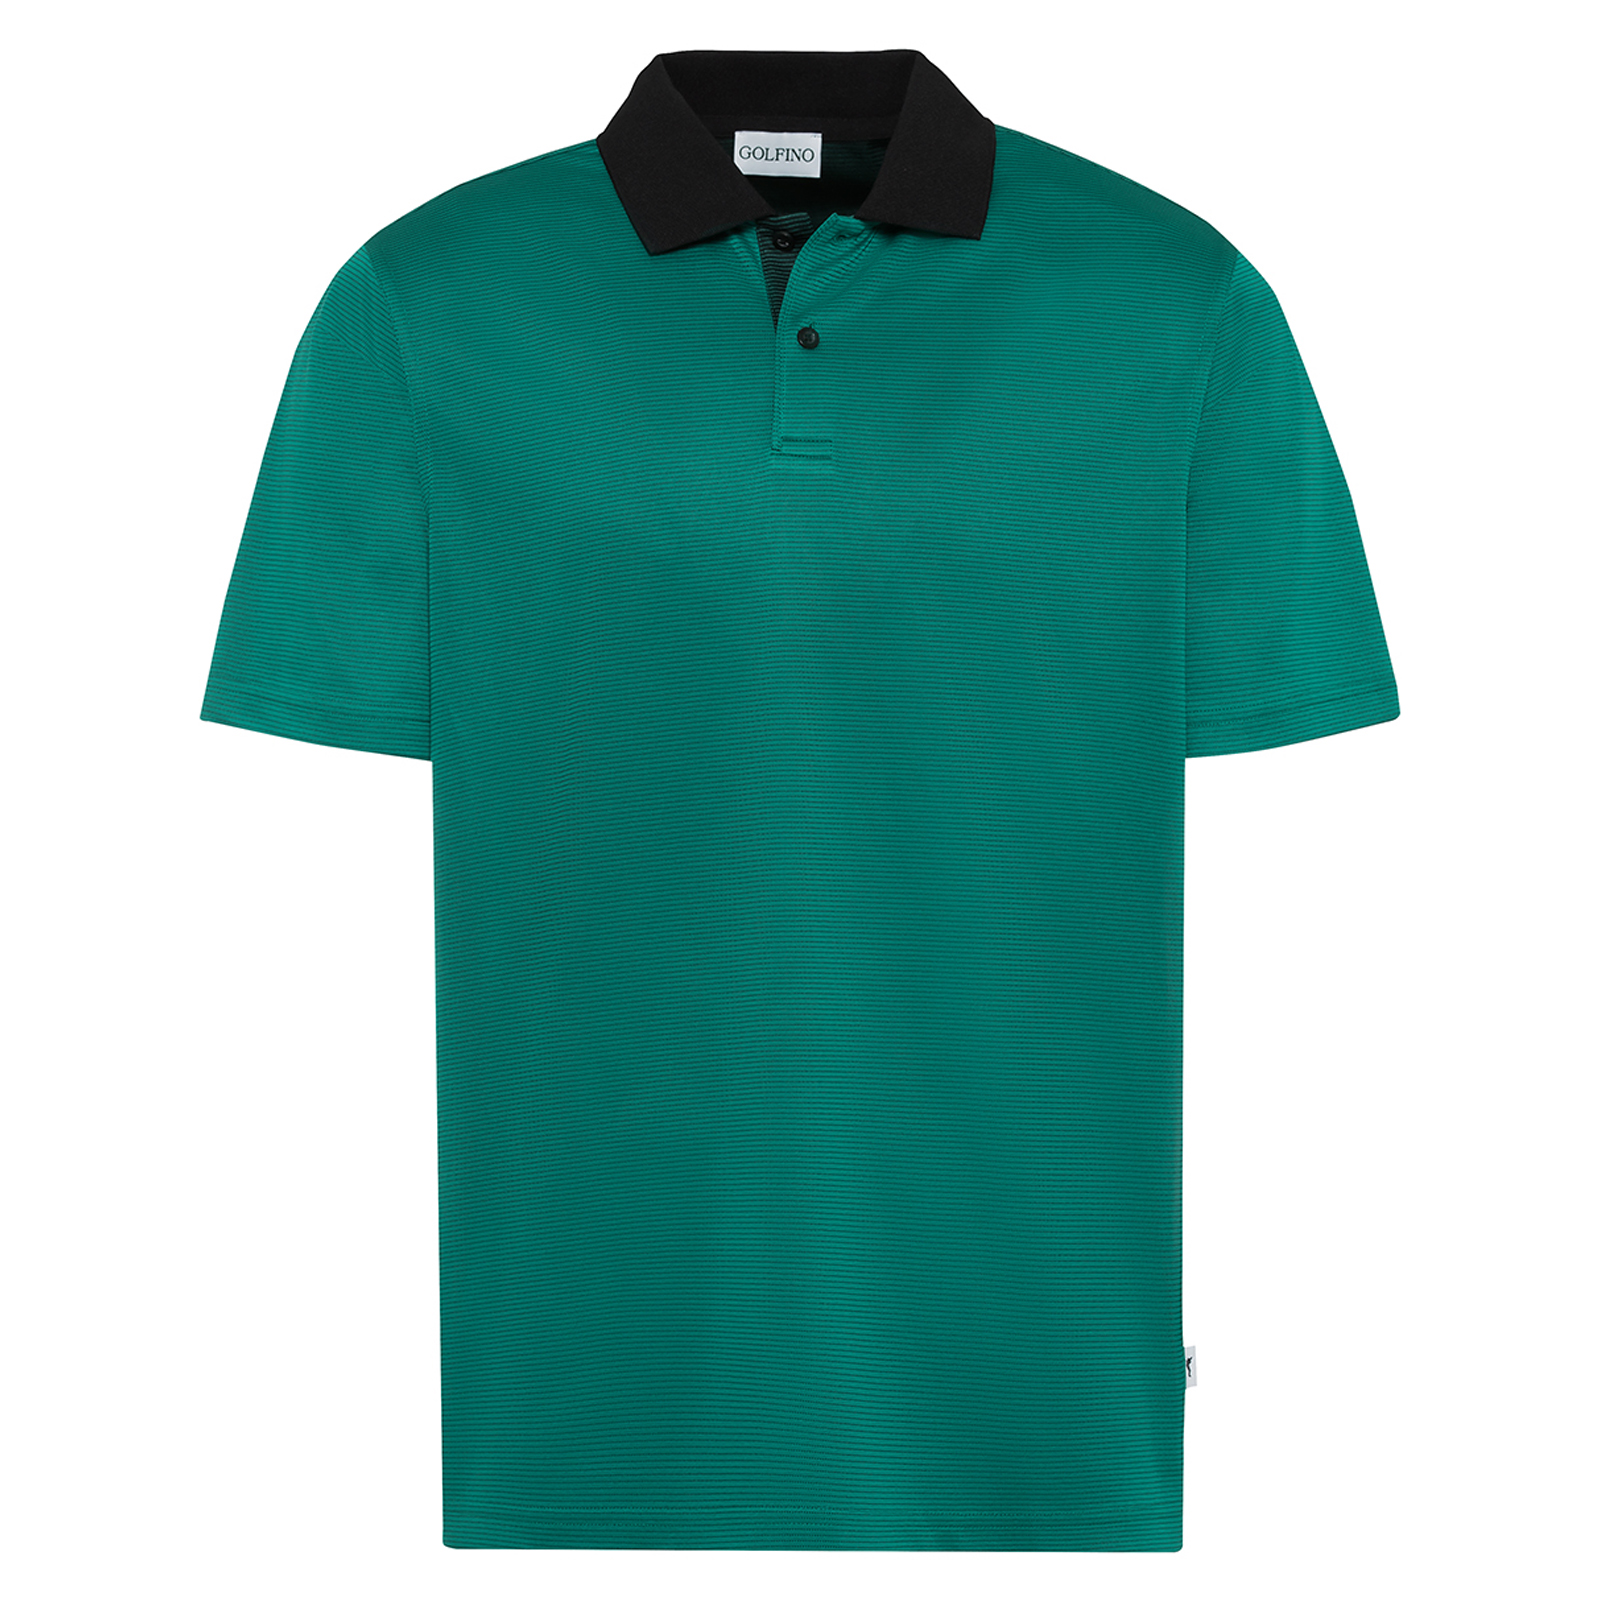 Men's polo made from antibacterial, moisture-regulating material